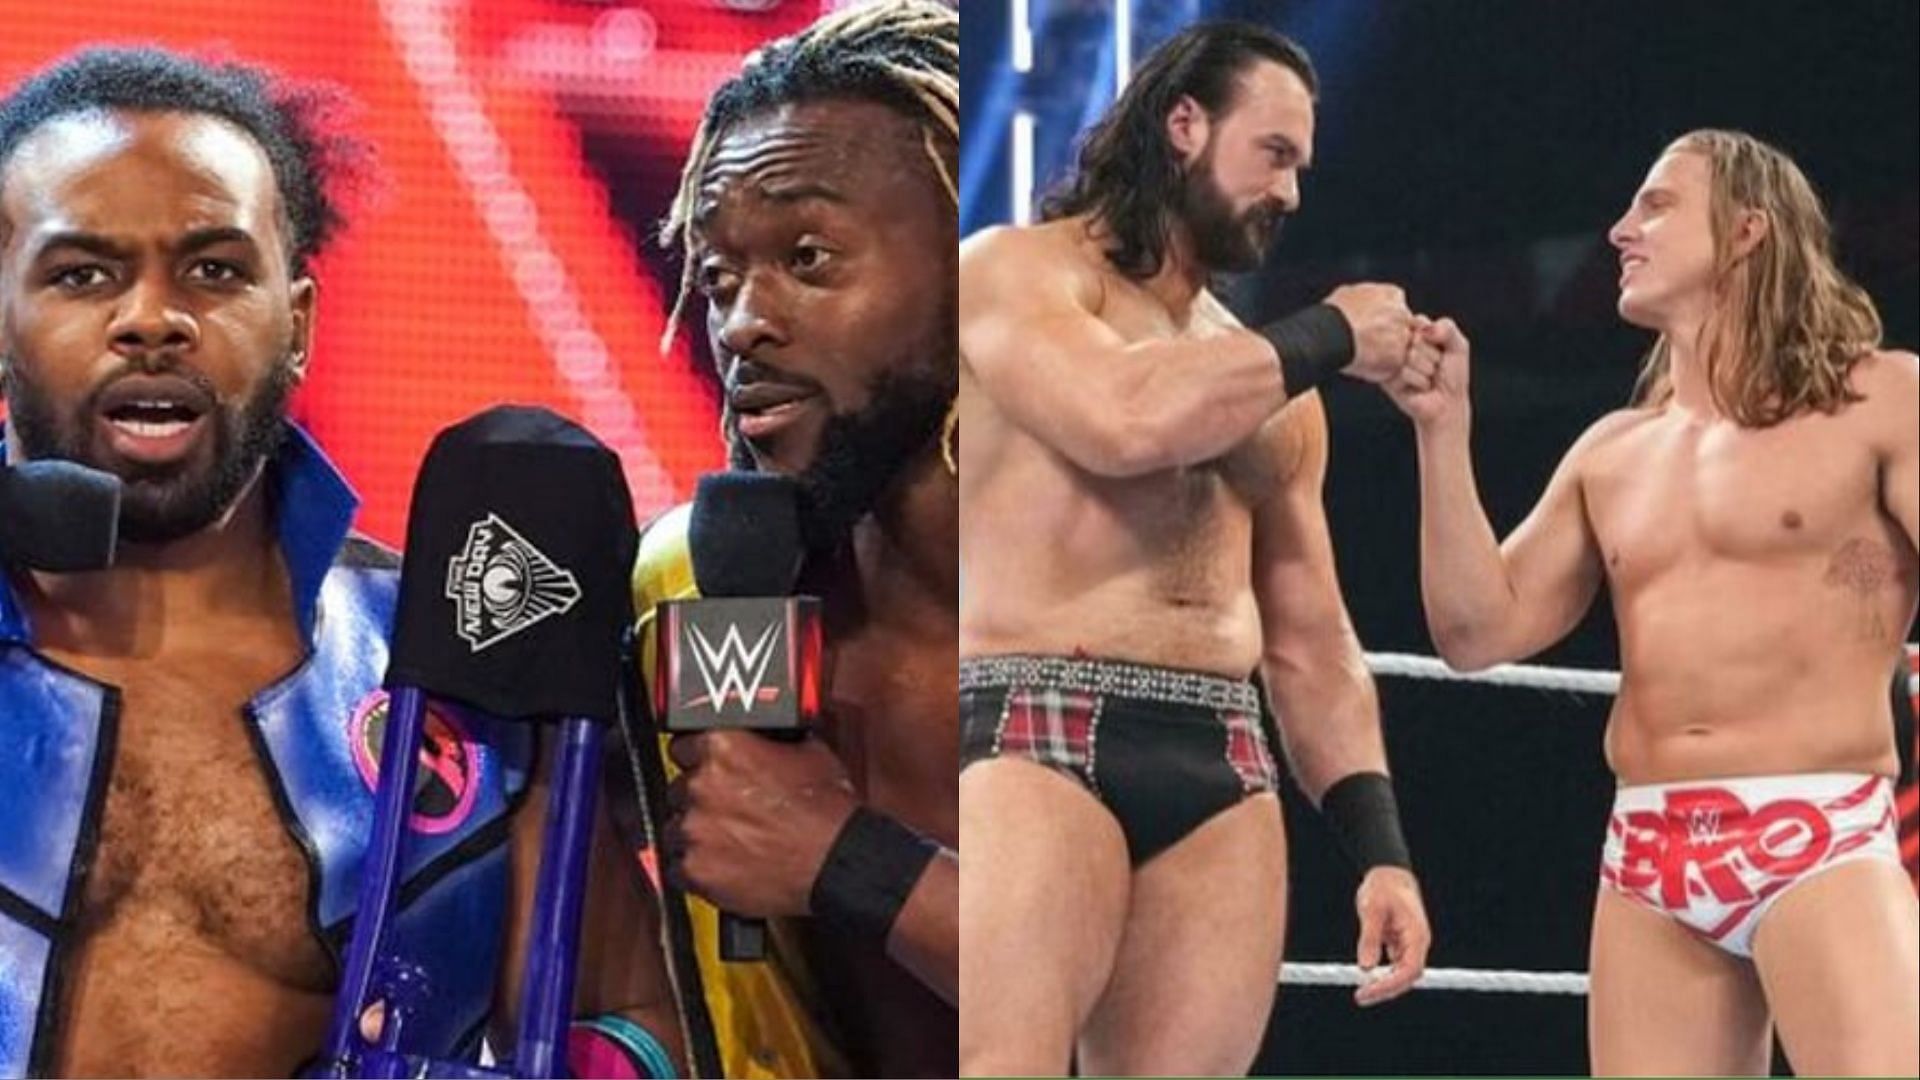 The New Day vs. Drew McIntyre &amp; Matt Riddle is set for WWE RAW tonight.